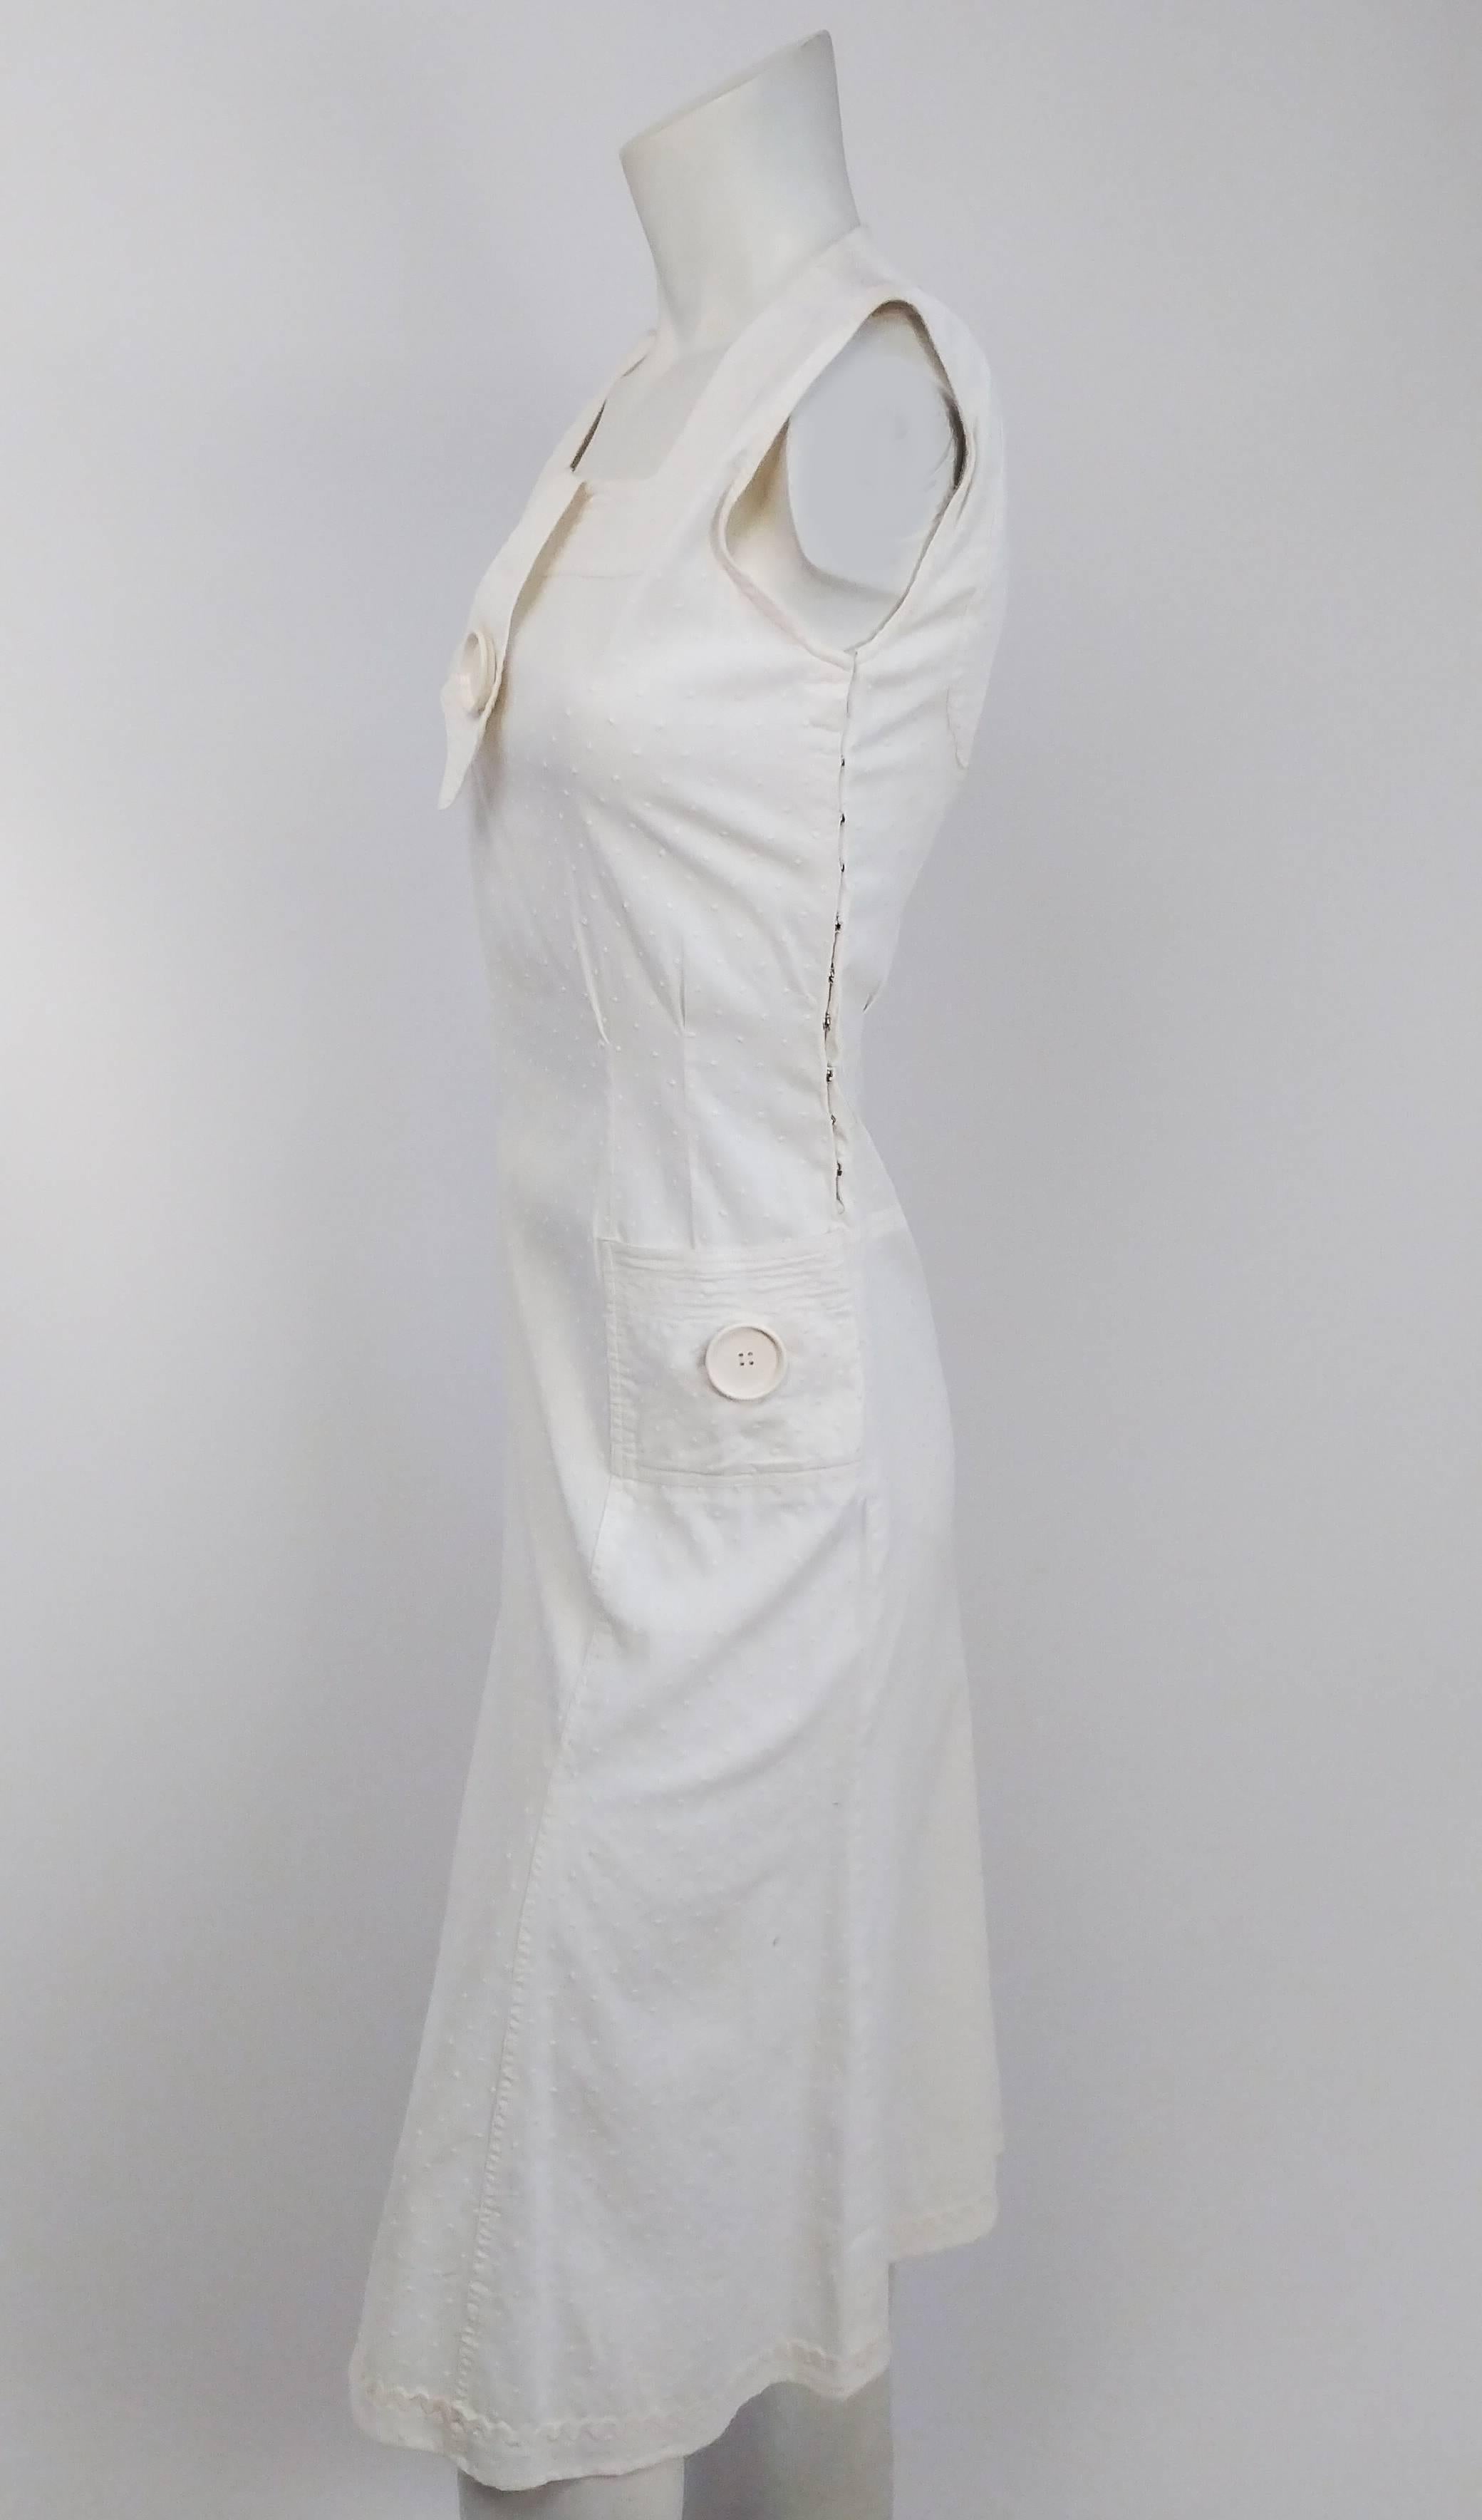 1920s White Swiss Dot Day Dress w/ Large Button Detail. Side snap closure. Faux neck tie detail w/ large button. Two square pockets with matching button details. Back cut-out detail. Rick rack trim on hem.  